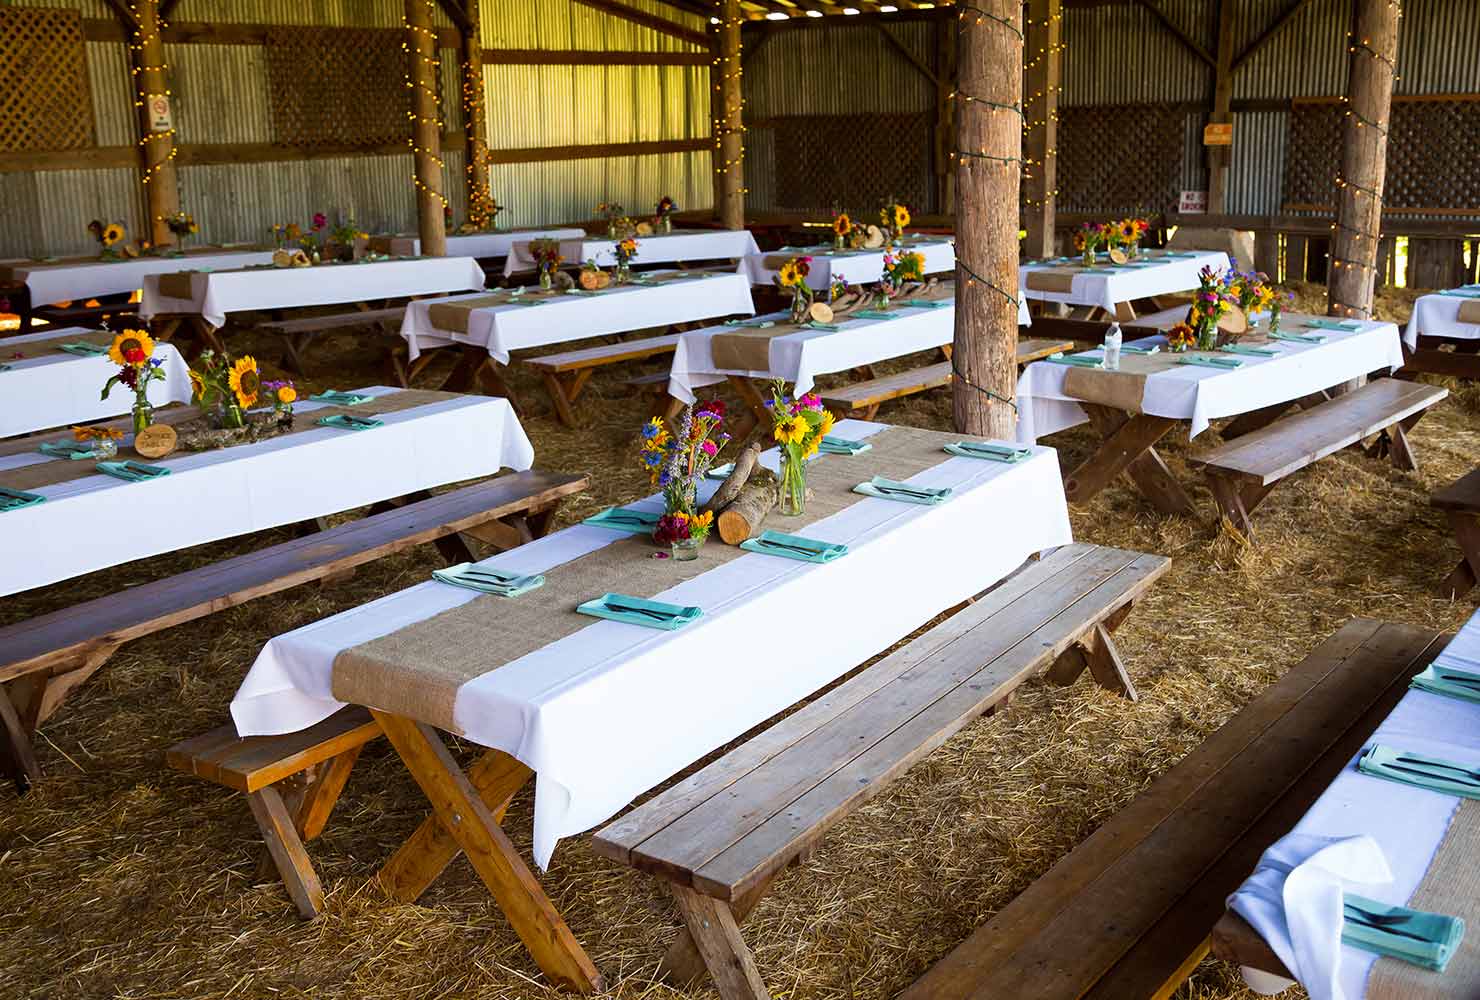 Barn with decorated picnic tables.